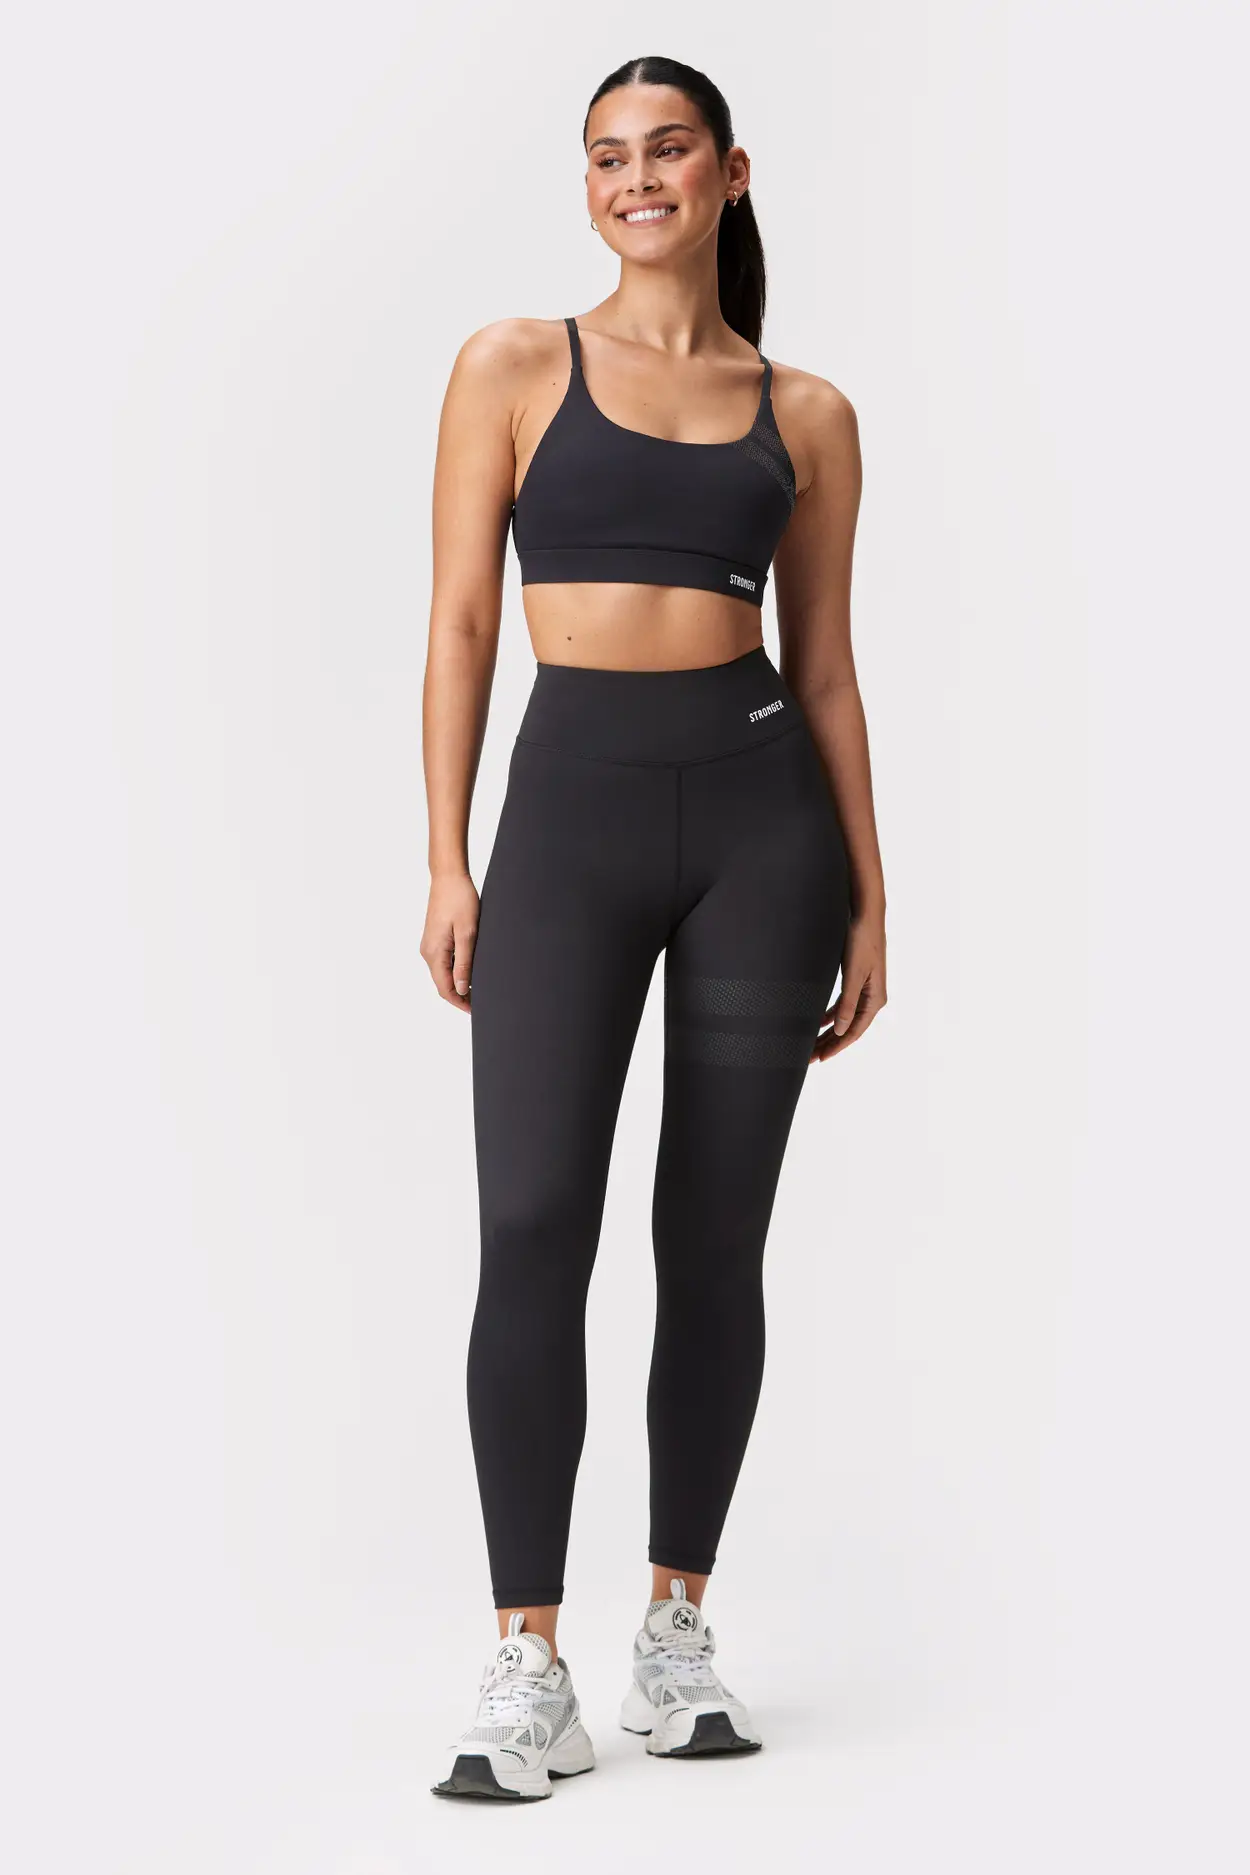 Naturana High Waisted Sport Legging With Side Mesh Inserts 44041 (S-XL)